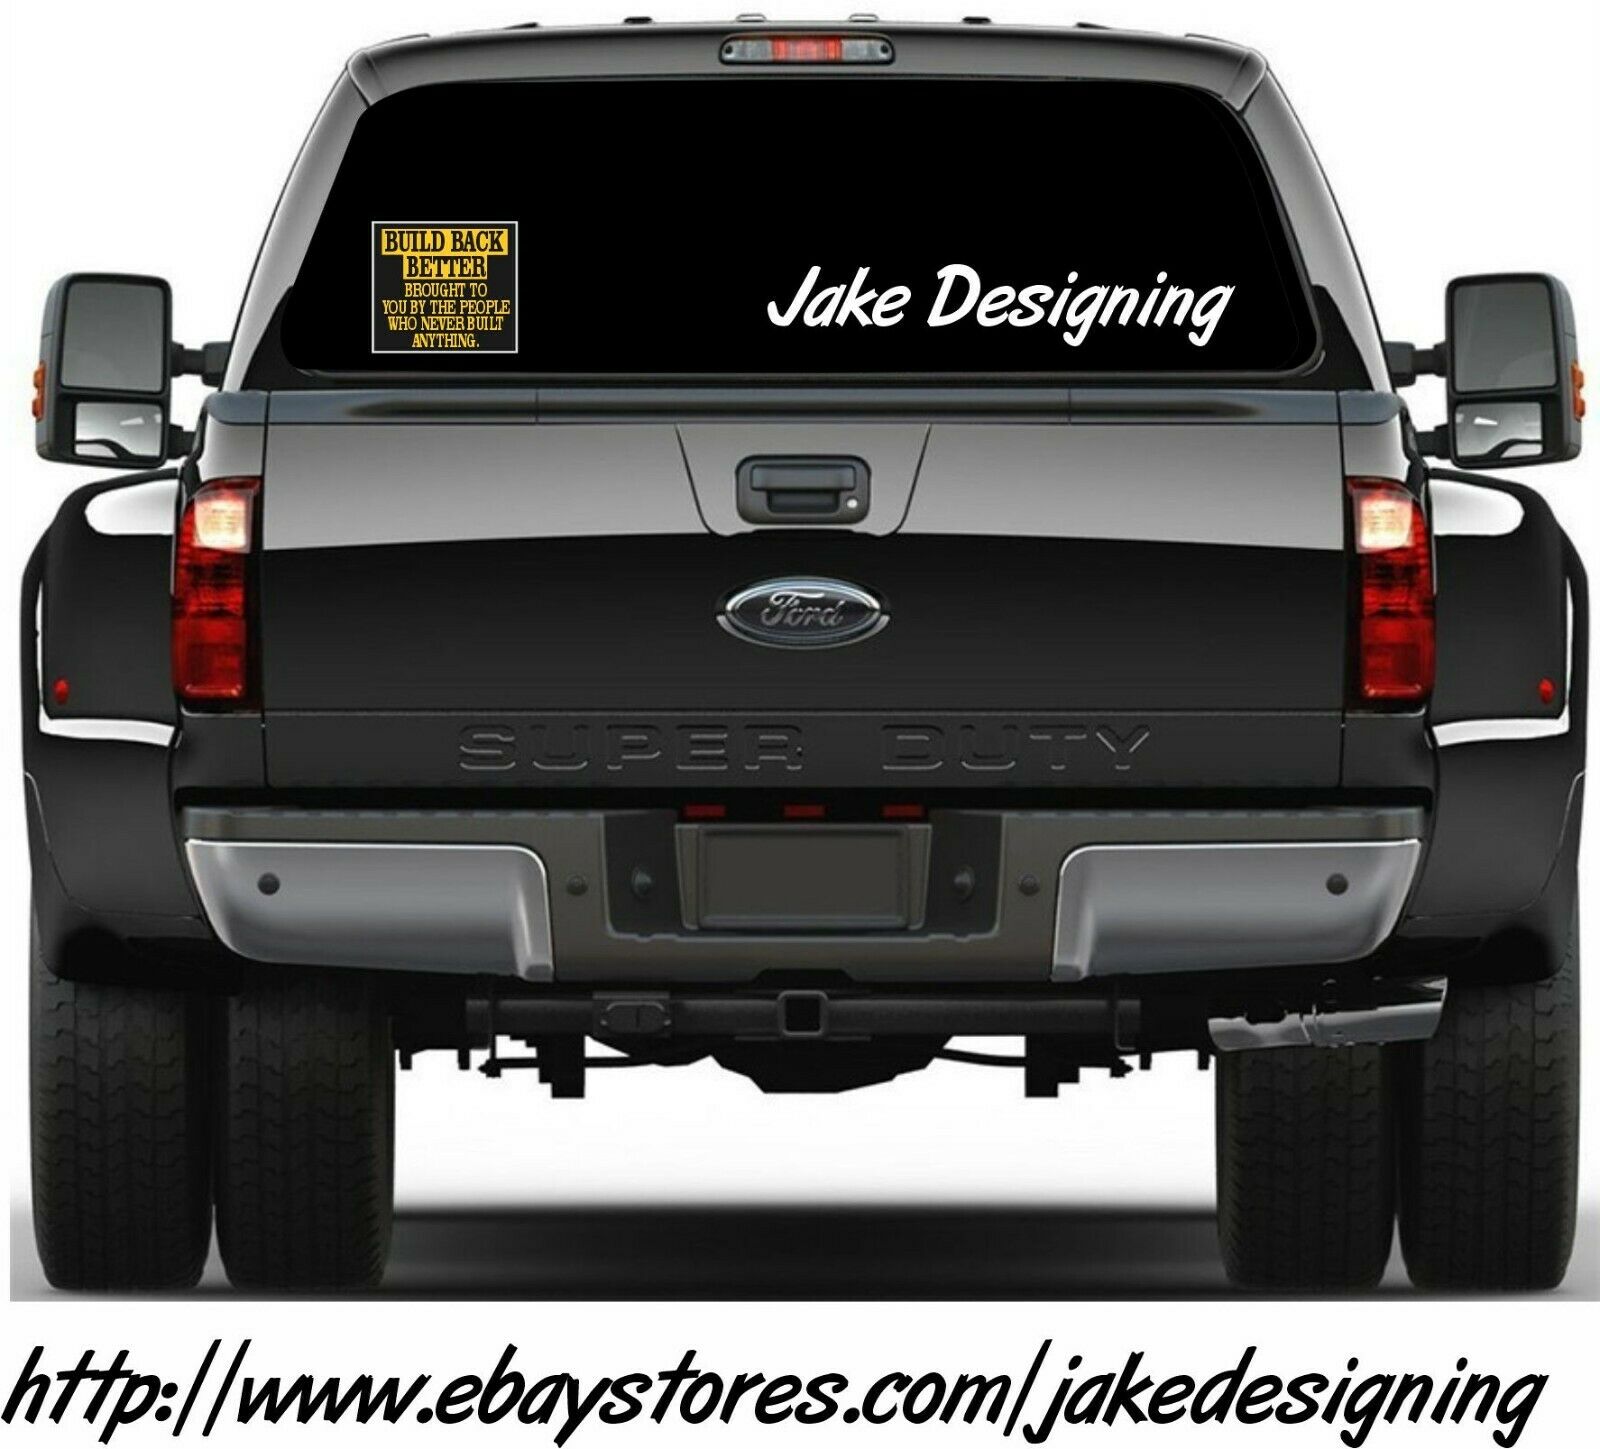 Build Back Better Sticker or Magnet Never Built Anything Political Decal/Magnet - Powercall Sirens LLC